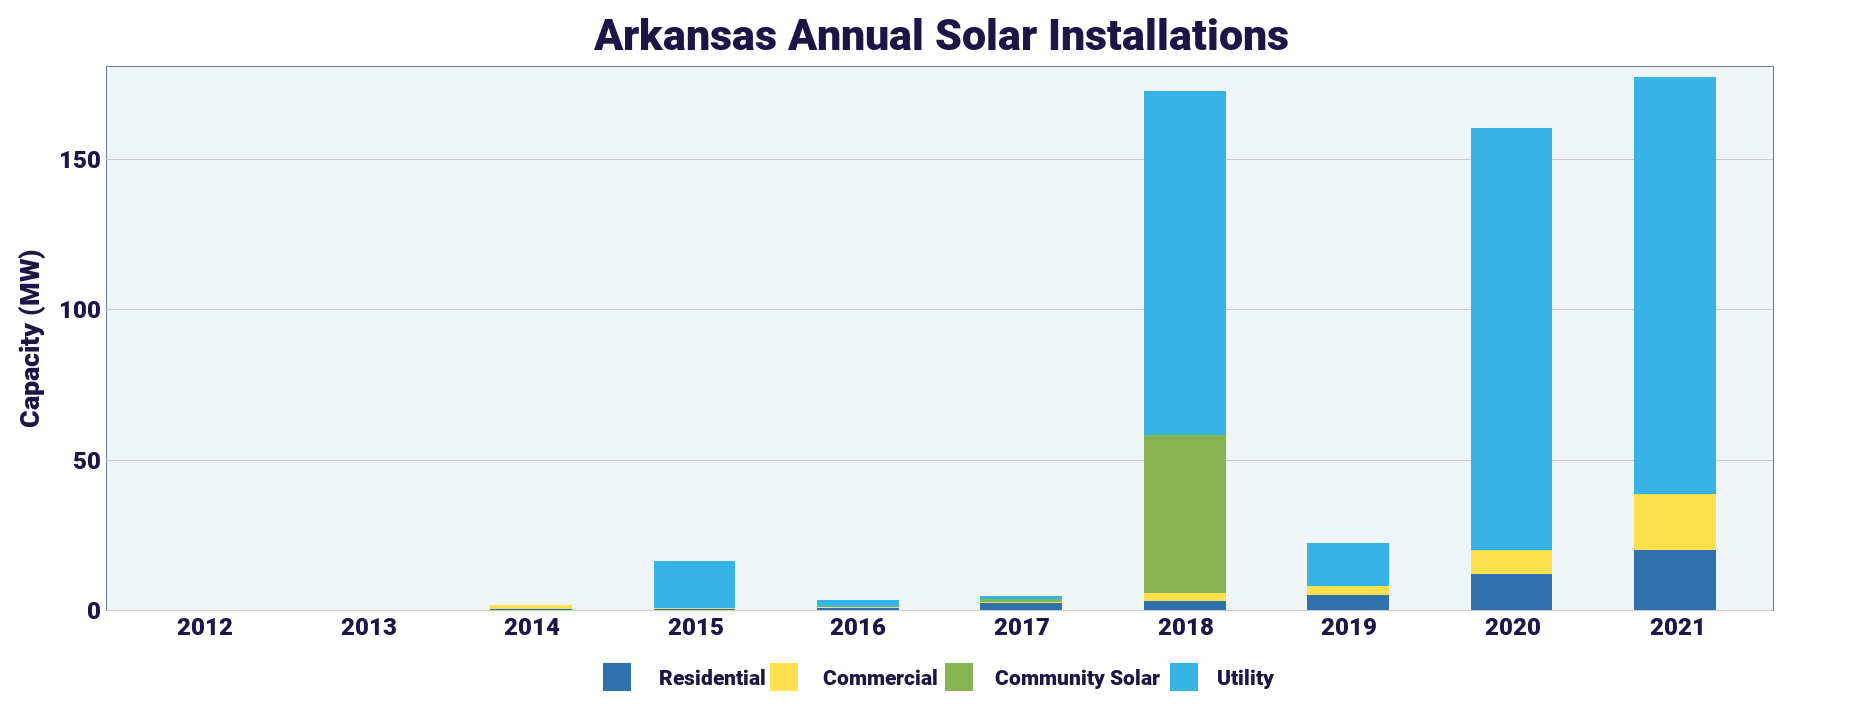 A column chart showing annual Arkansas solar installation for residential, commercia, community solar, and utility installation. Solar installation has increased significantly since 2017 for all property types. 